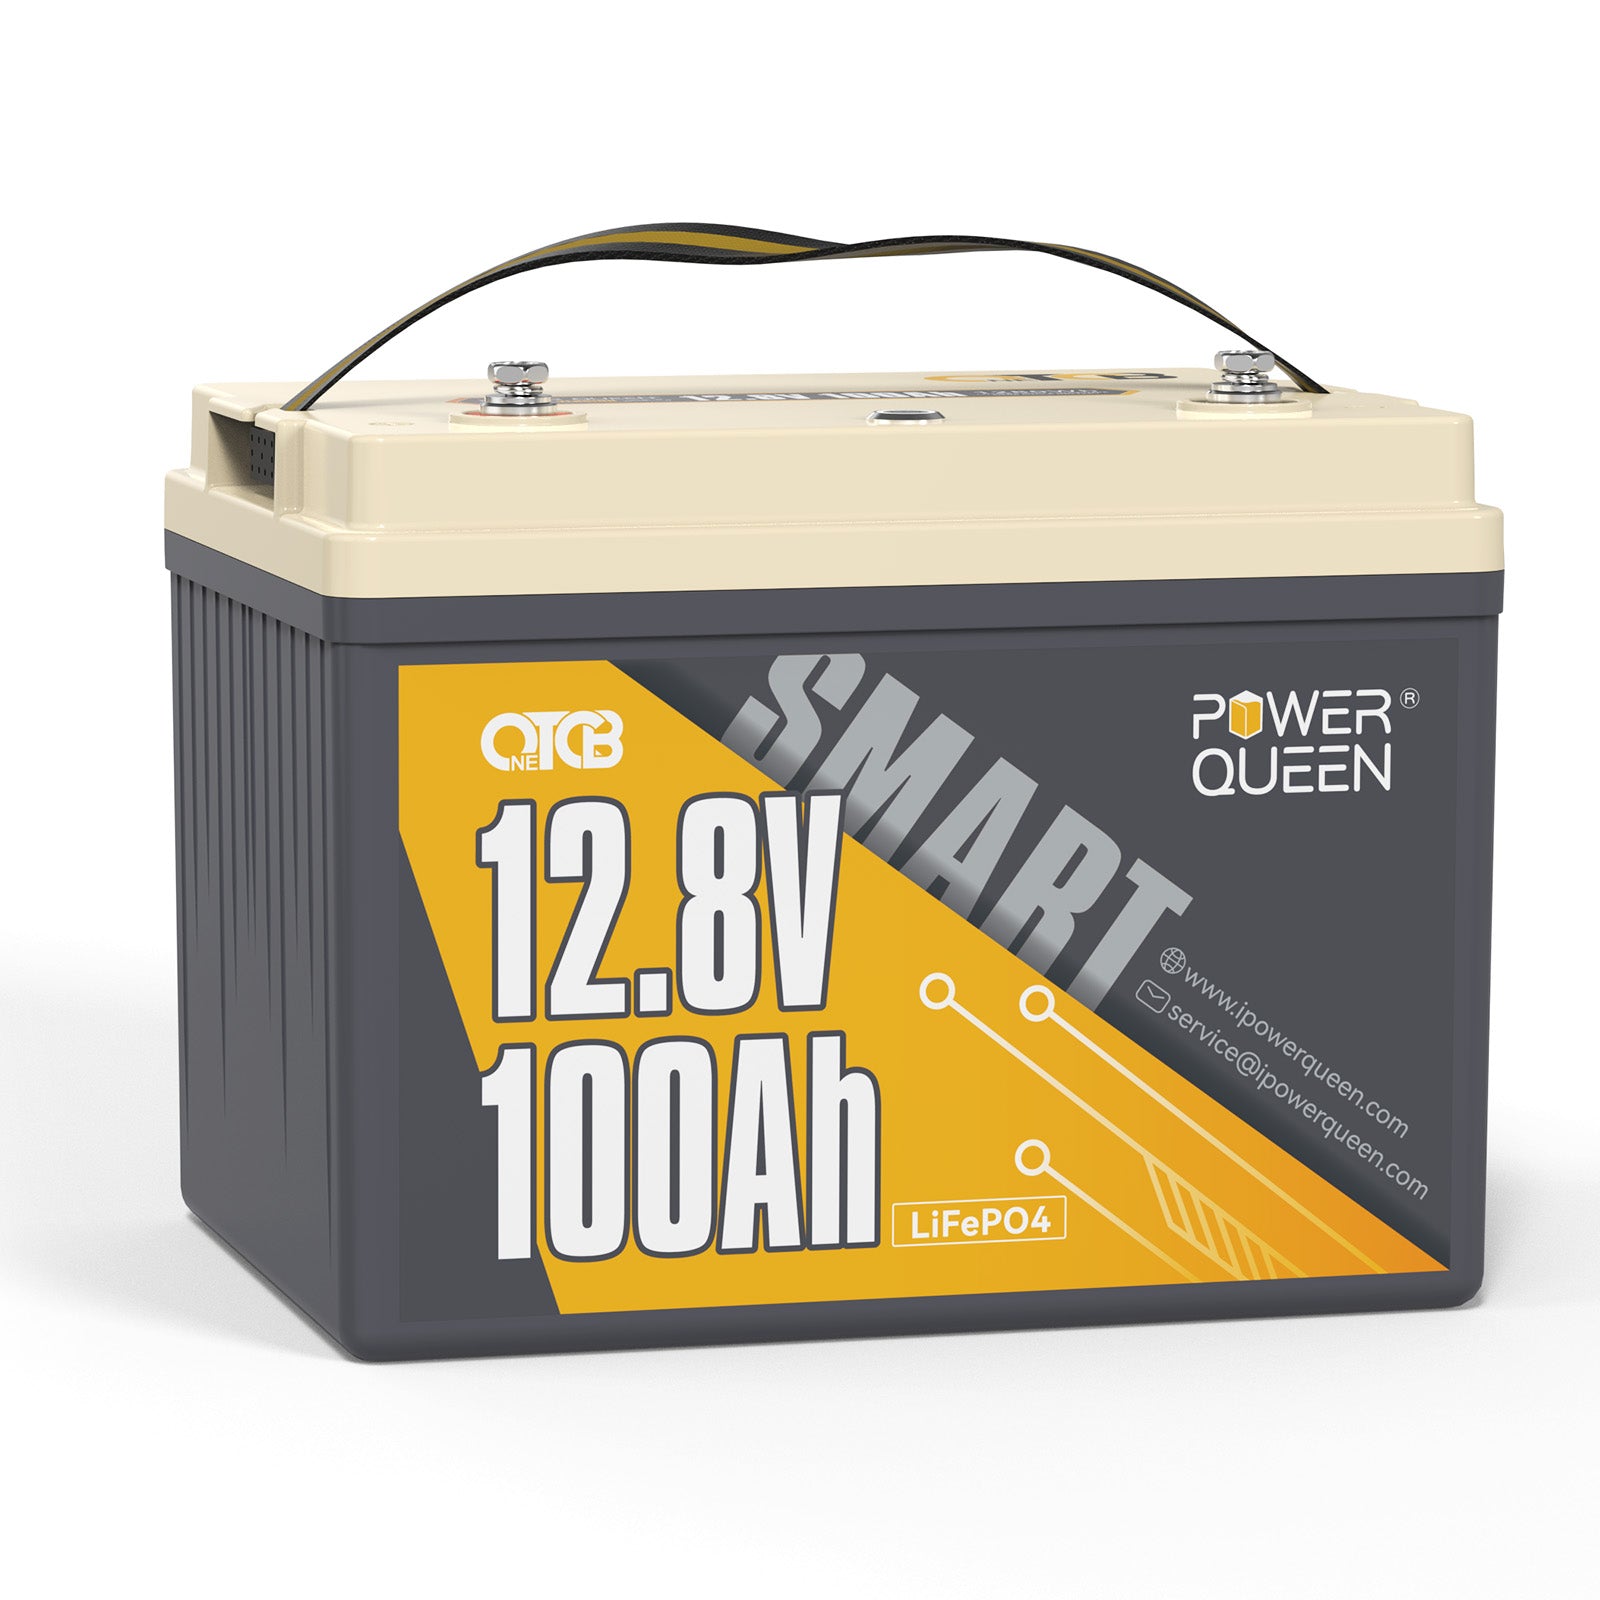 【0% VAT】Power Queen 12V 100Ah low temp OTCB LiFePO4 battery with built-in 100A BMS